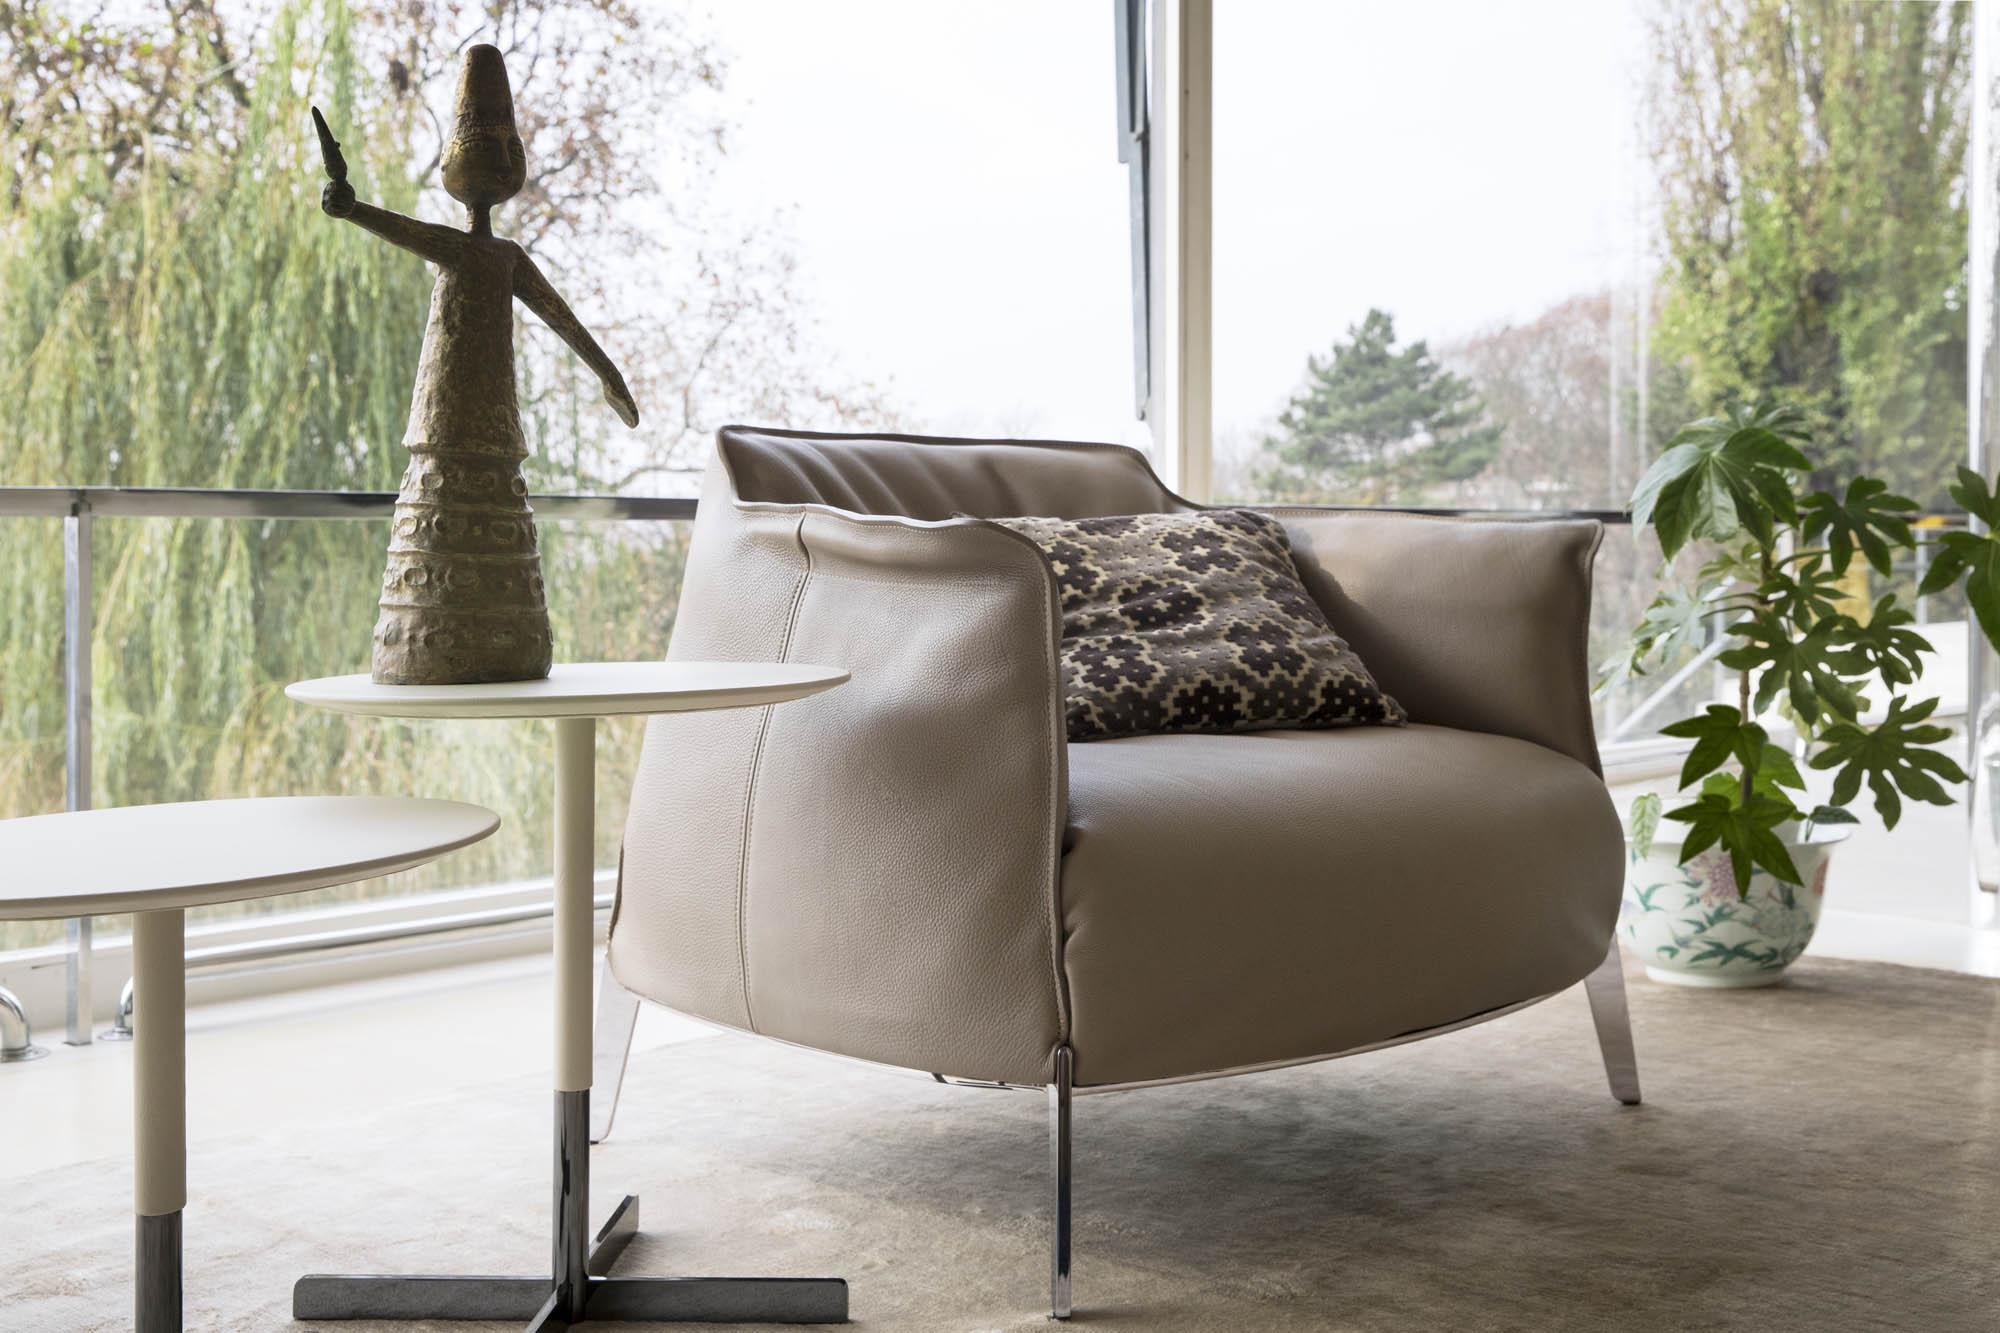 Jean-Marie Massaud adds a surplus of softness to the Archibald collection: the Archibald Gran Comfort armchair. The central element is the large, soft seat cushion. A luxurious leather casing with rich goose down padding that creates a refined